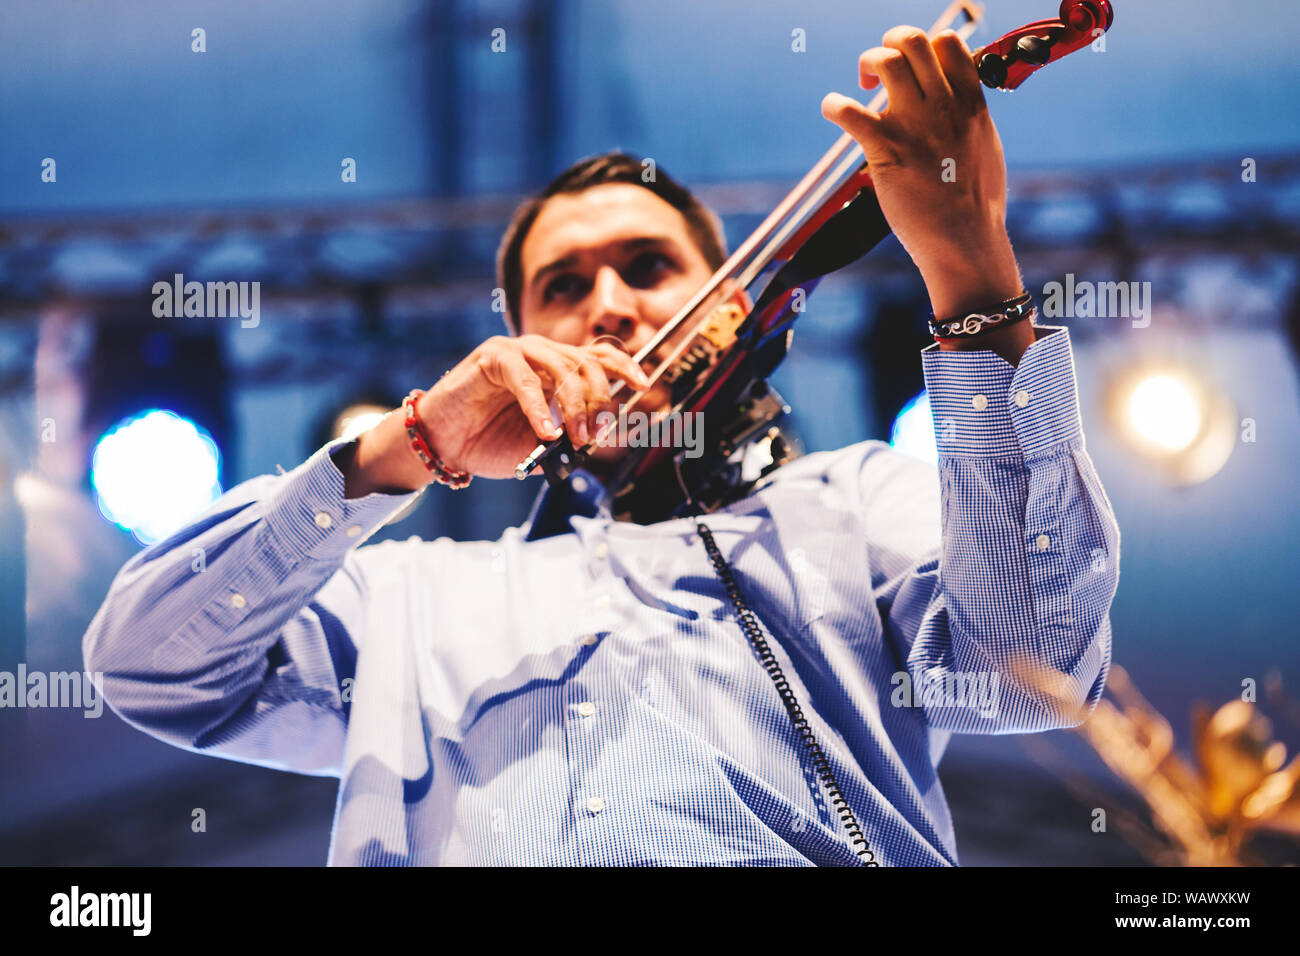 Pranjani, Serbia - August 18, 2019: Concert of violinist Momir Jovanovic, winner of the first festival of violinists in Serbia. Stock Photo